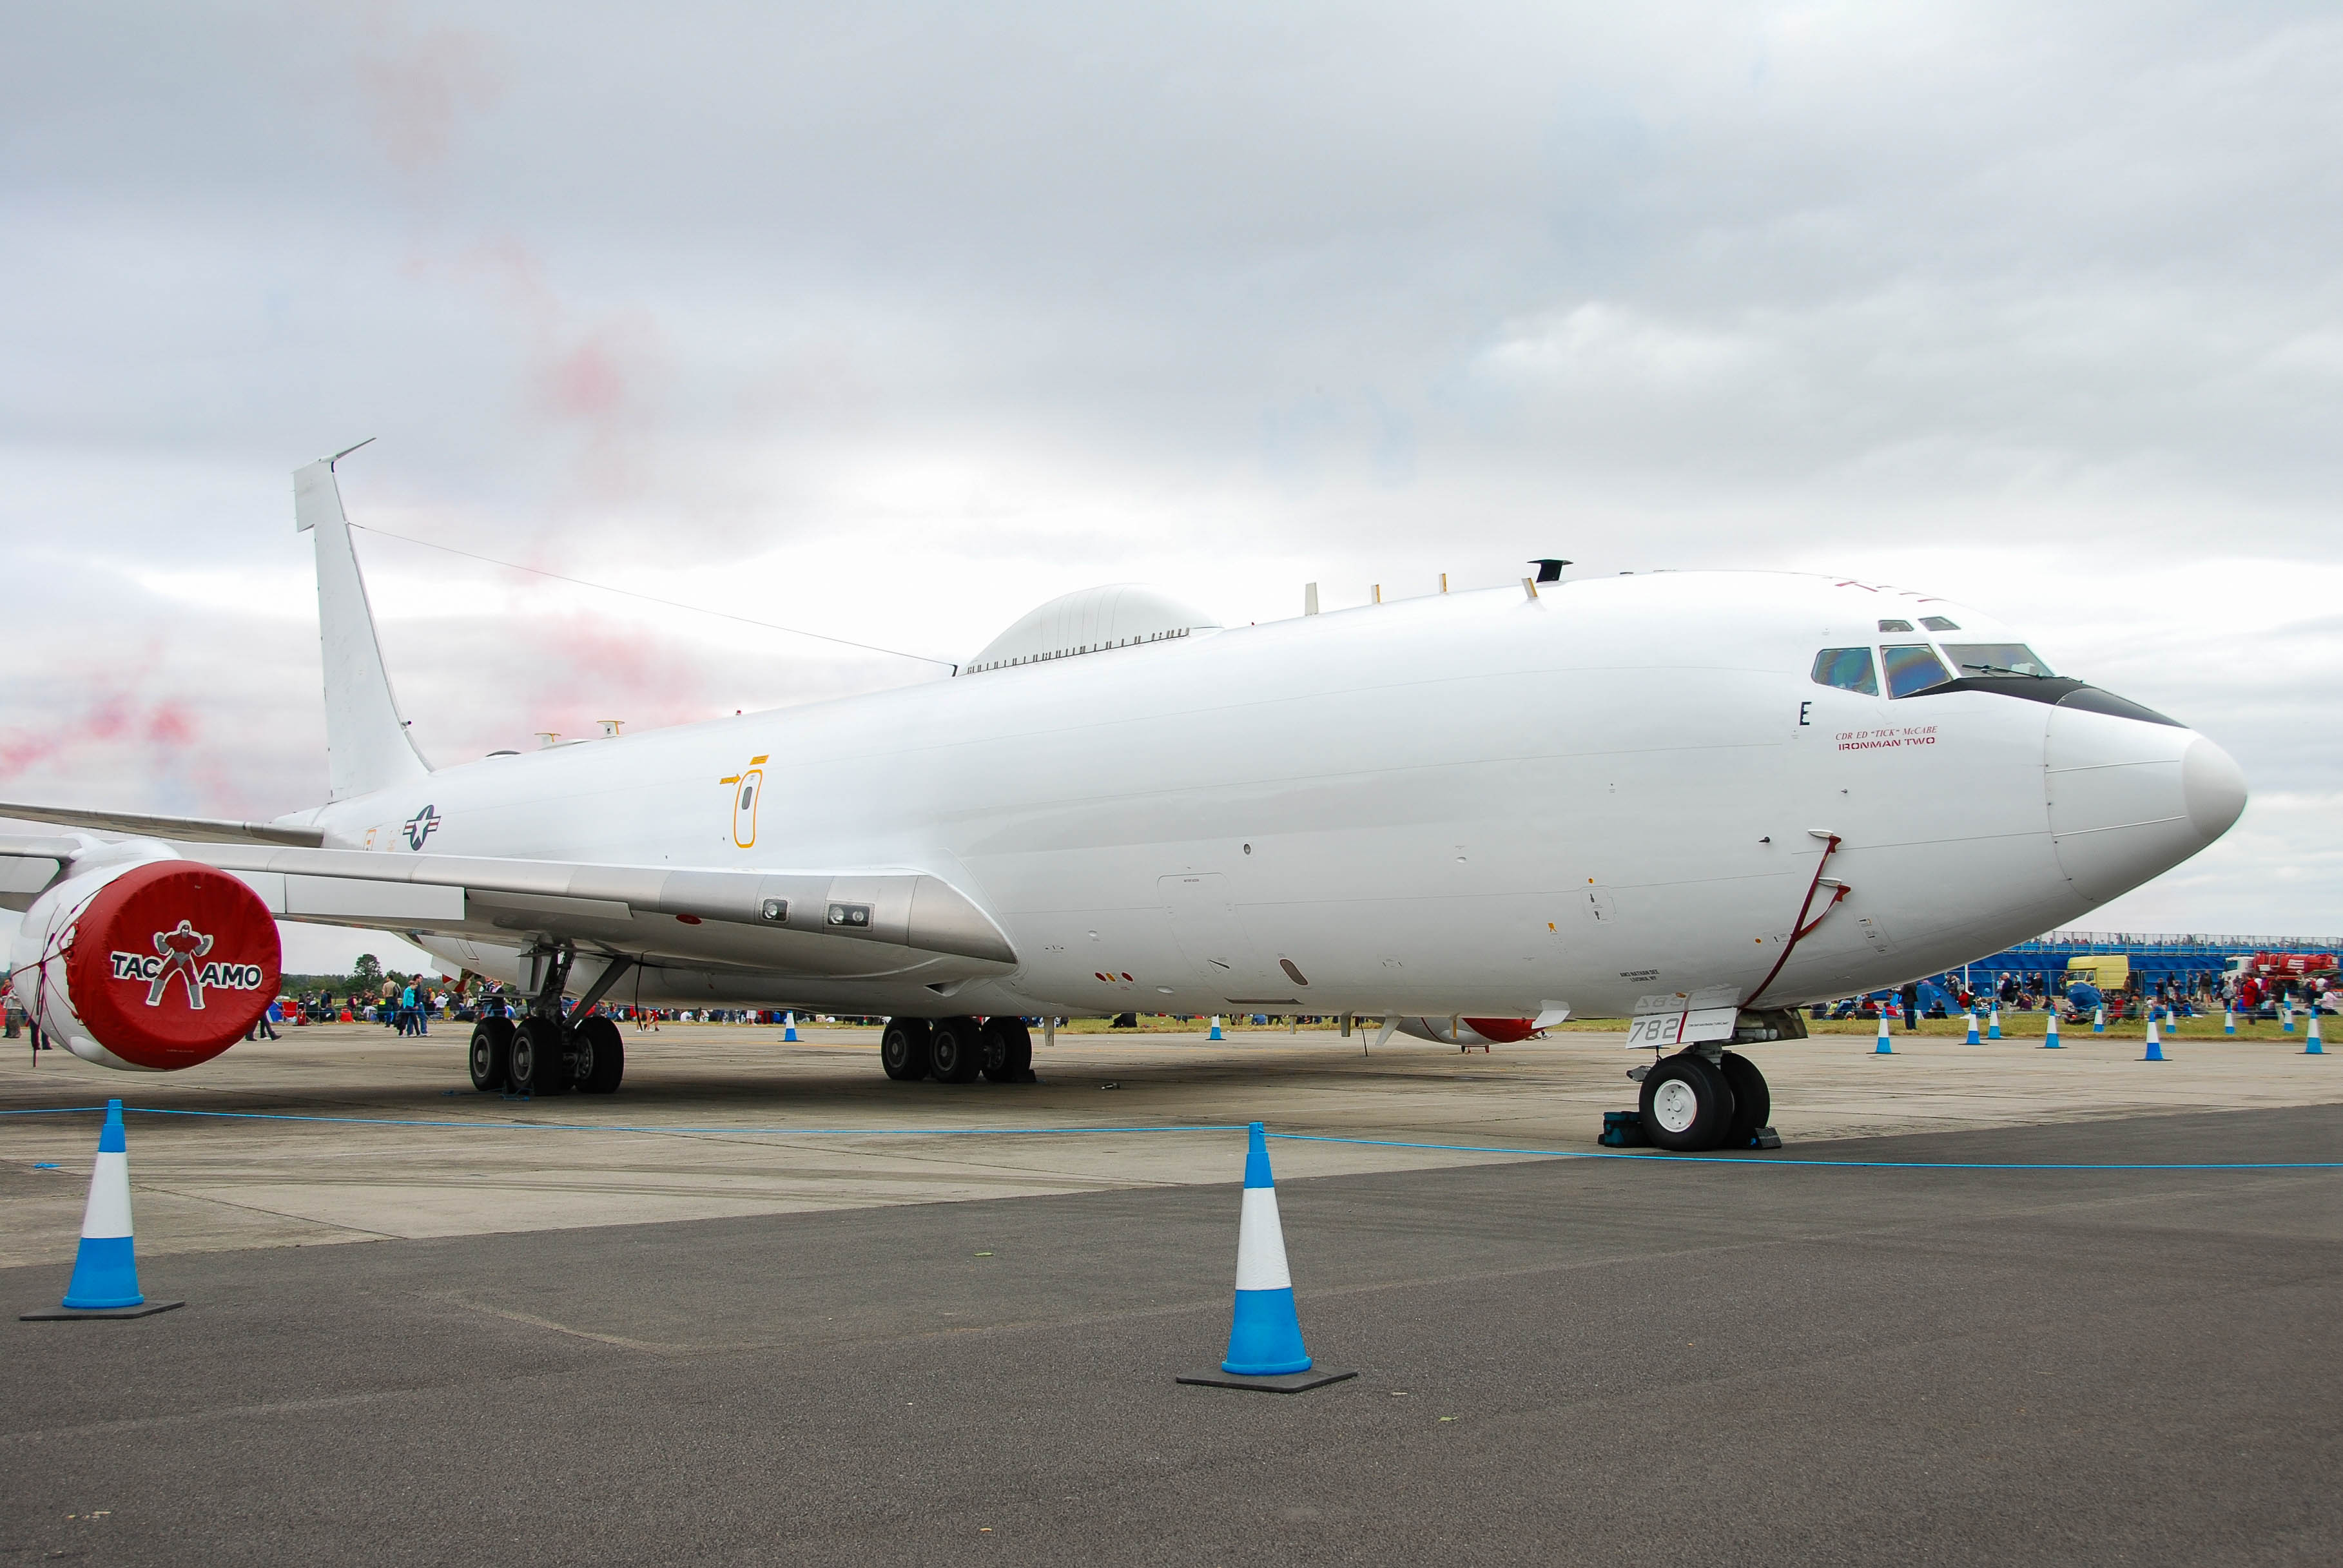 162782/162782 USN - United States Navy Boeing E-6A Mercury Photo by colinw - AVSpotters.com